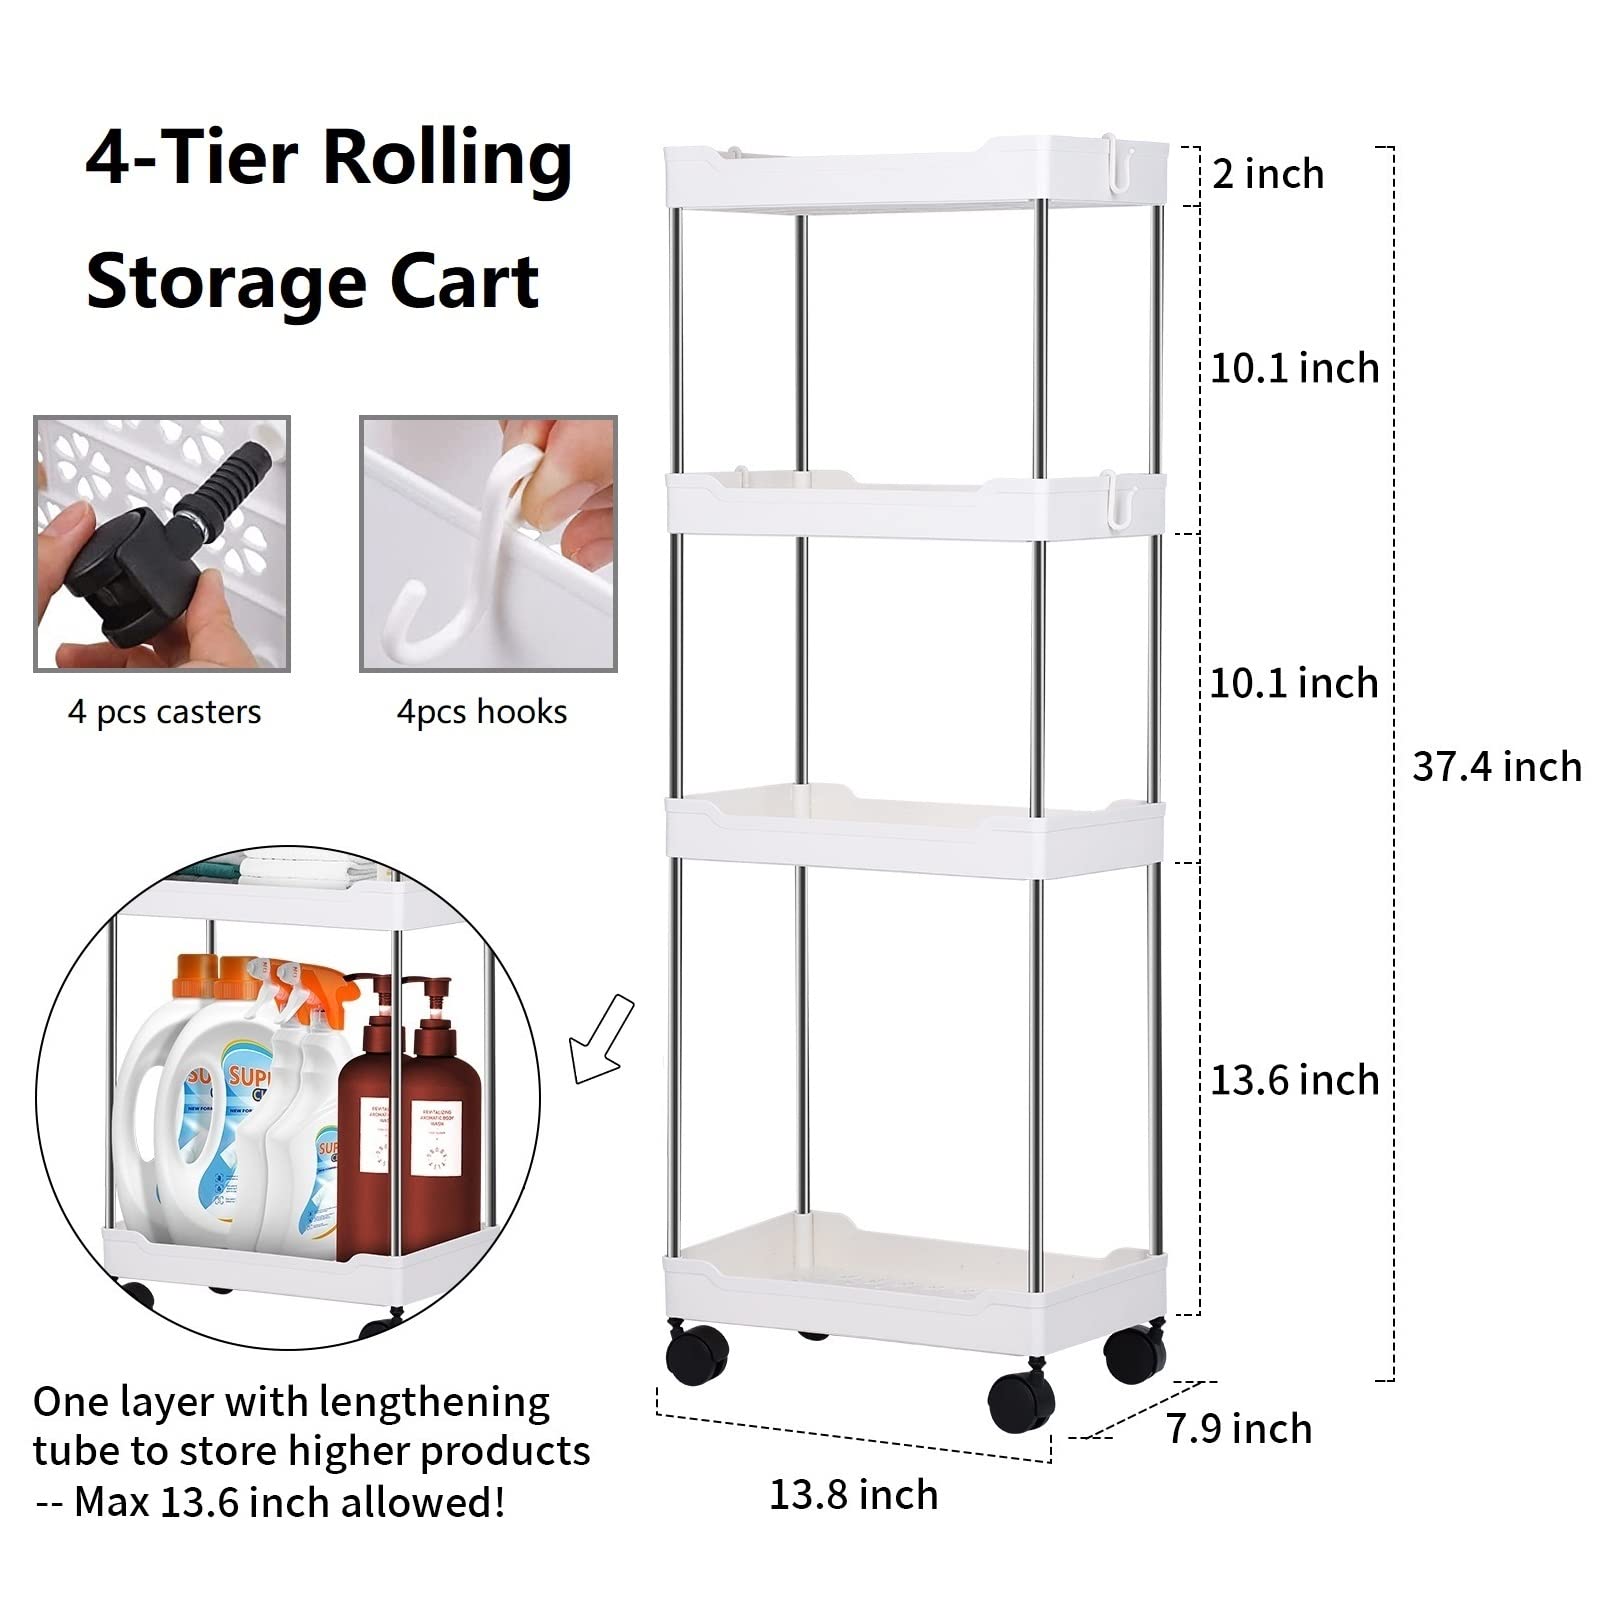 4-Tier Rolling Storage Cart, Bathroom Storage Organizer Shelf Utility Cart with Wheels - Ideal for Bathroom, Kitchen, and Laundry Room Organization - Space-Saving Design, White